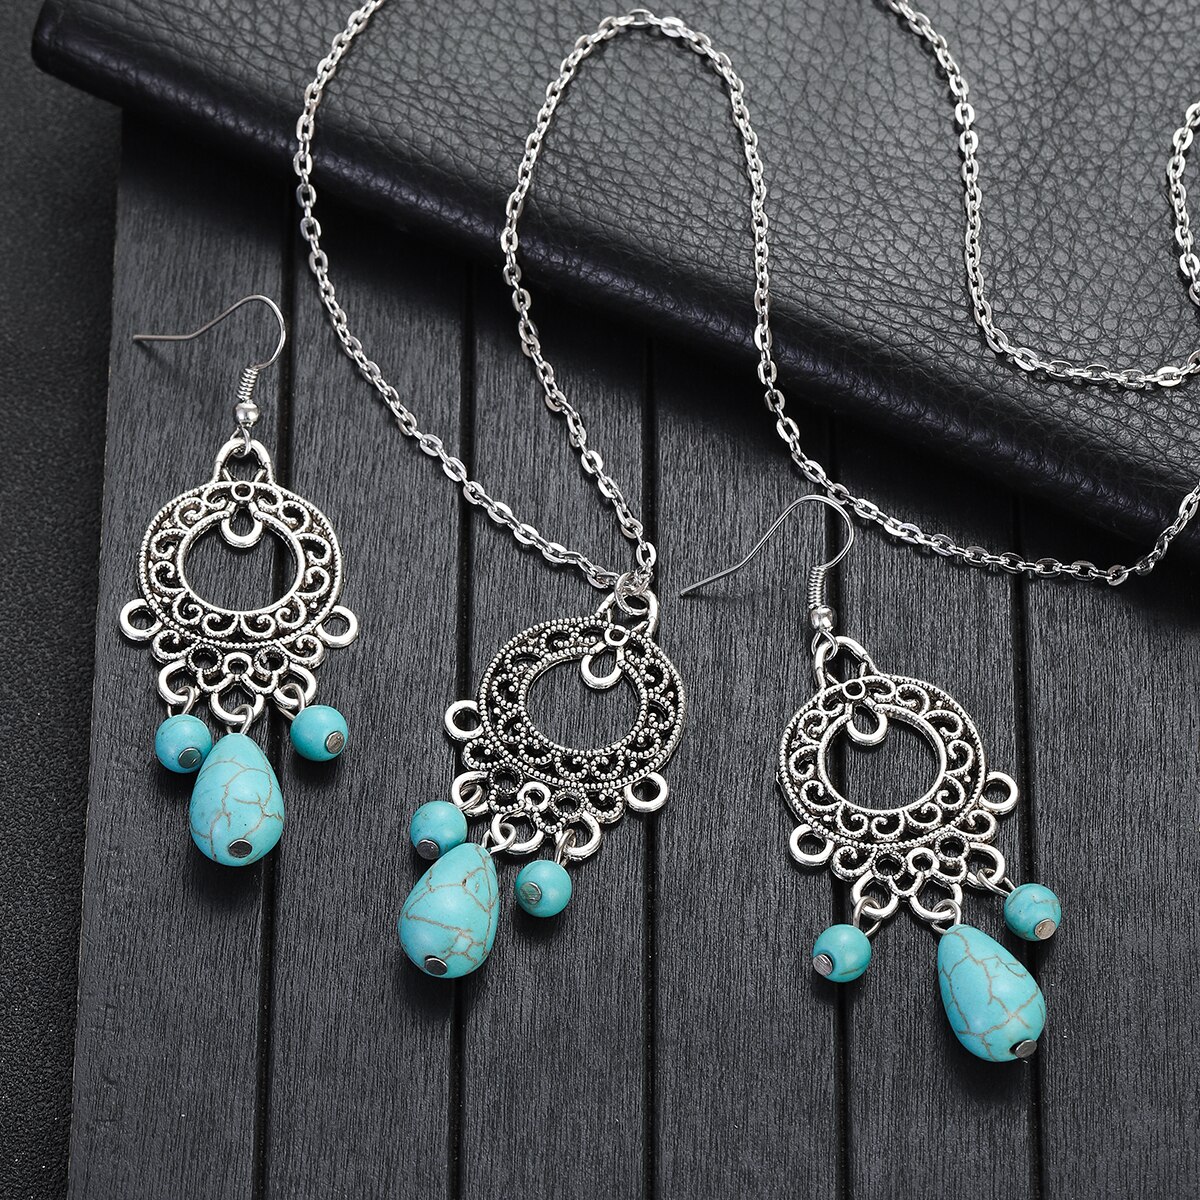 Ethnic-Boho-Blue-Stone-Tassel-Jewelry-Set-Charm-Ladies-Vintage-Jewelry-Silver-Color-Hollow-Flower-Ch-1005005134002231-3